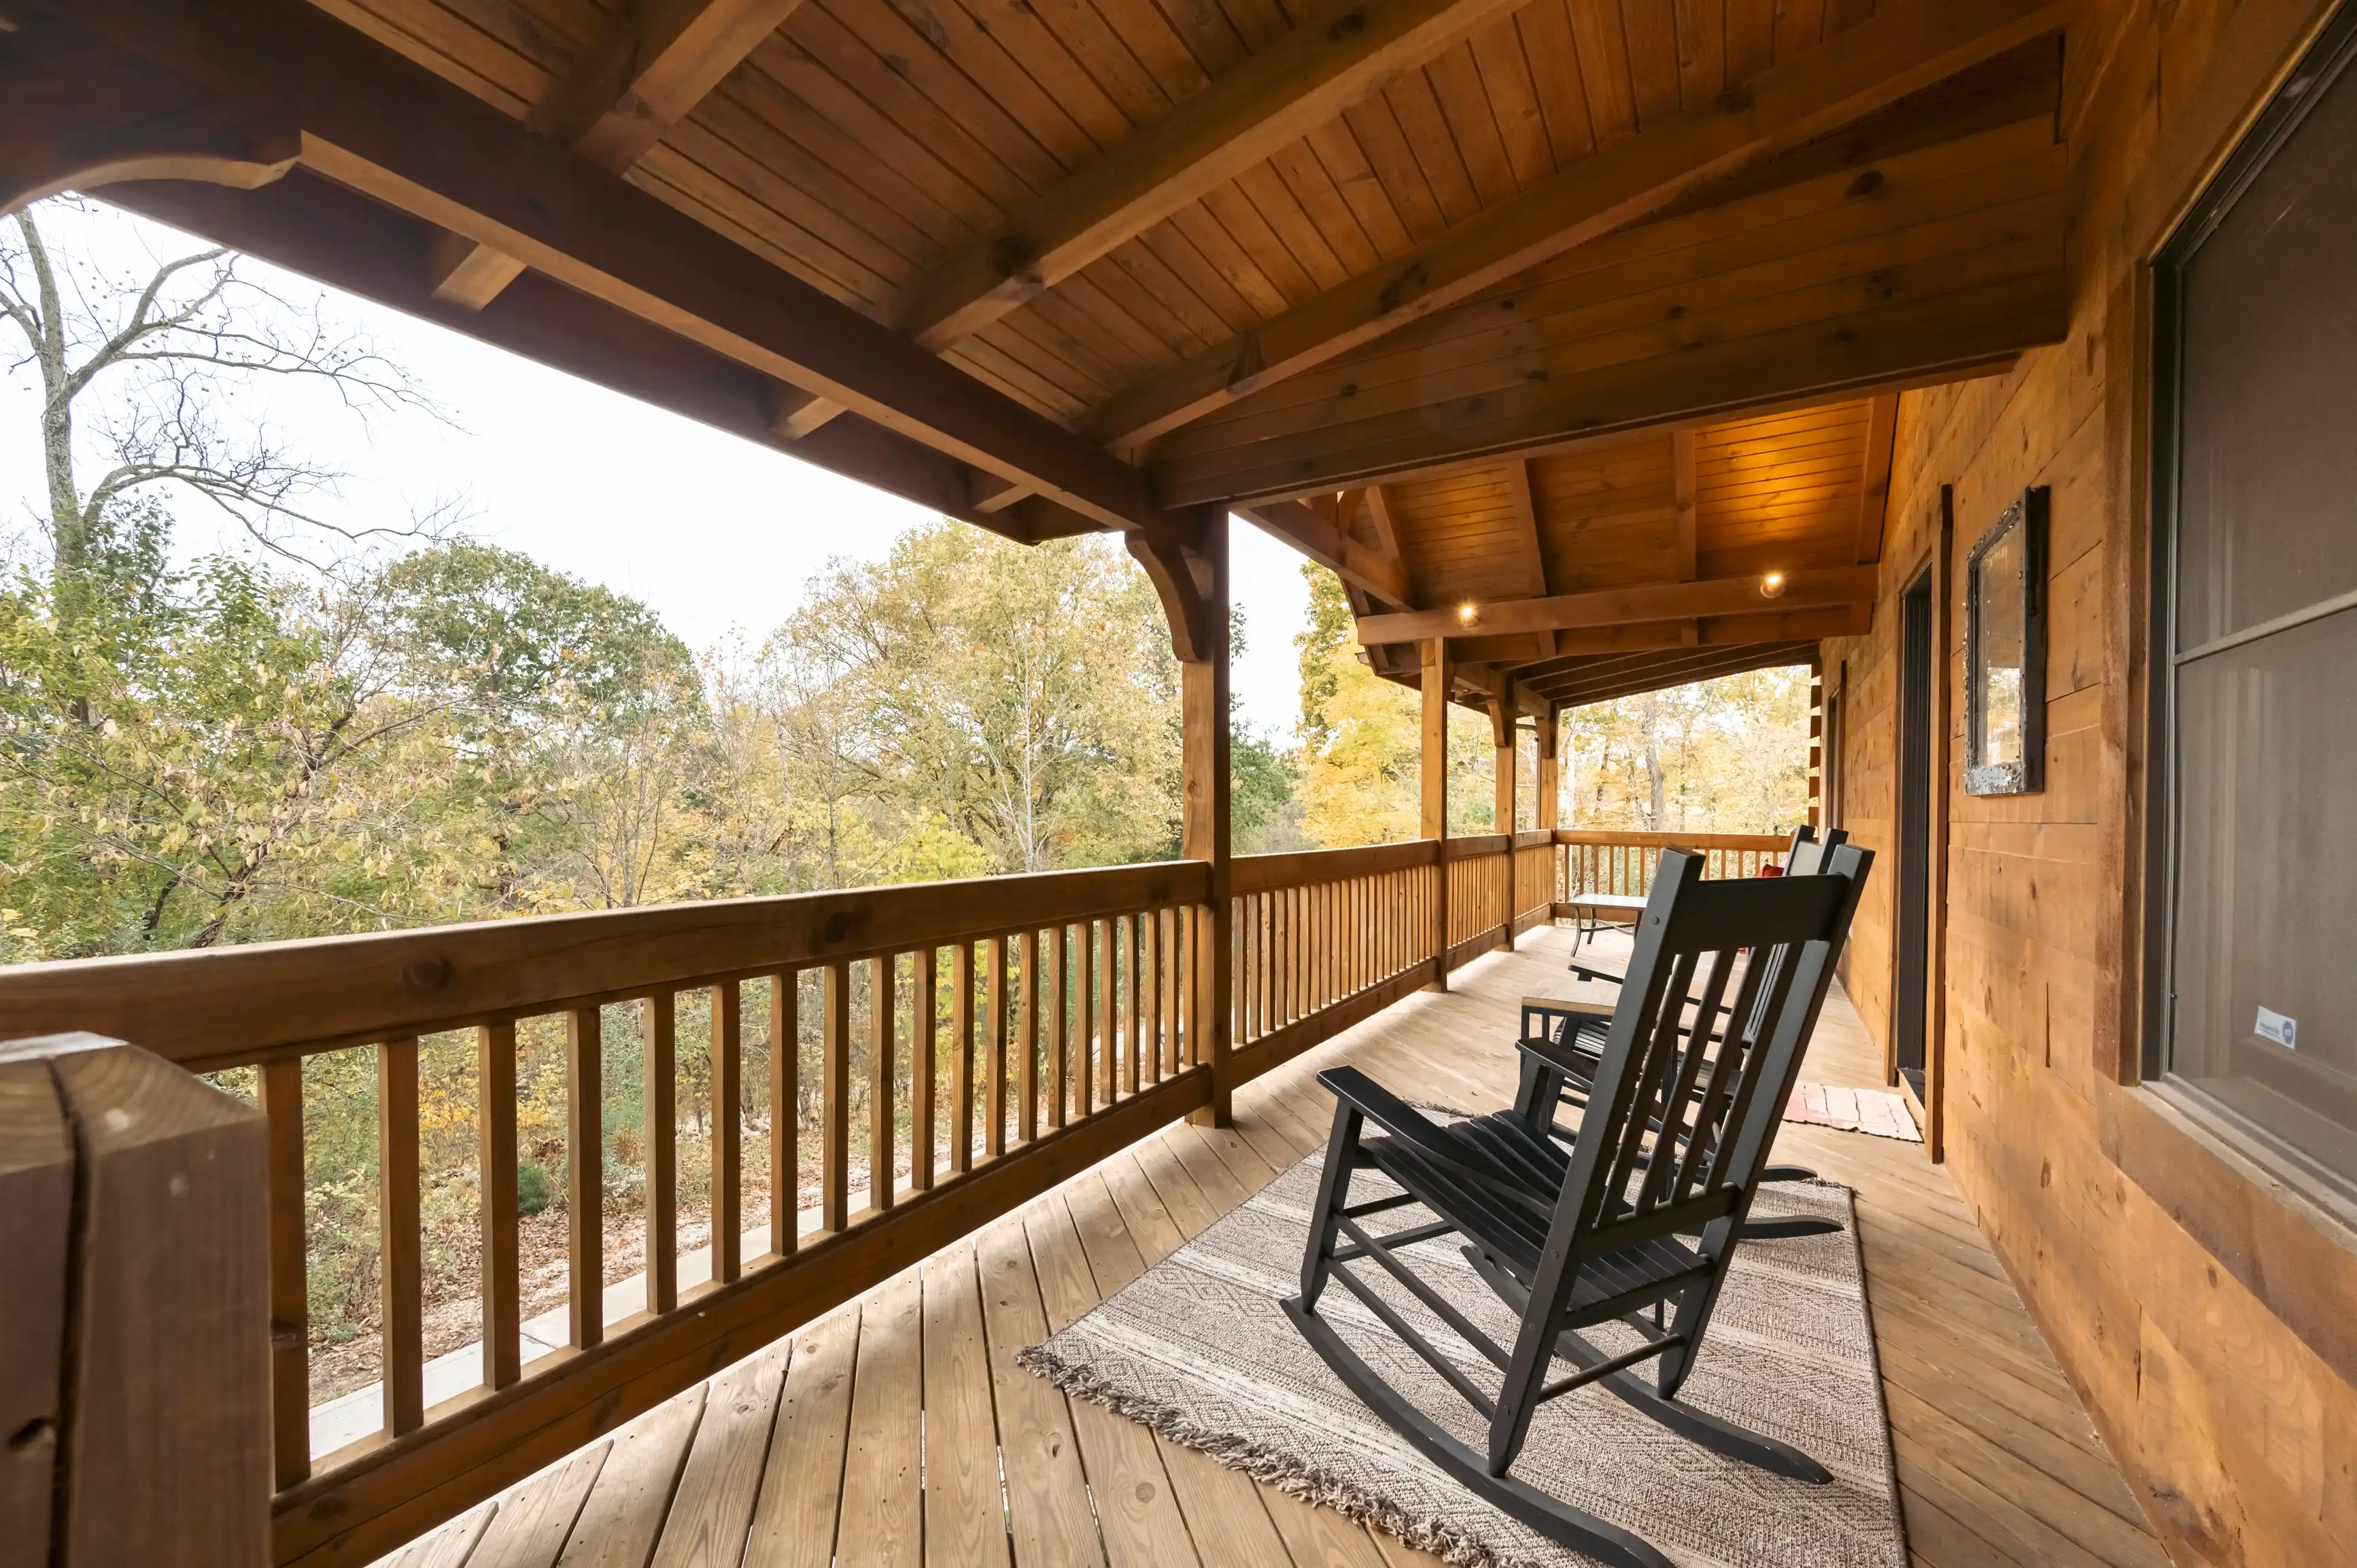 Spacious wooden deck of a rustic house with outdoor furniture and a view of autumn trees.